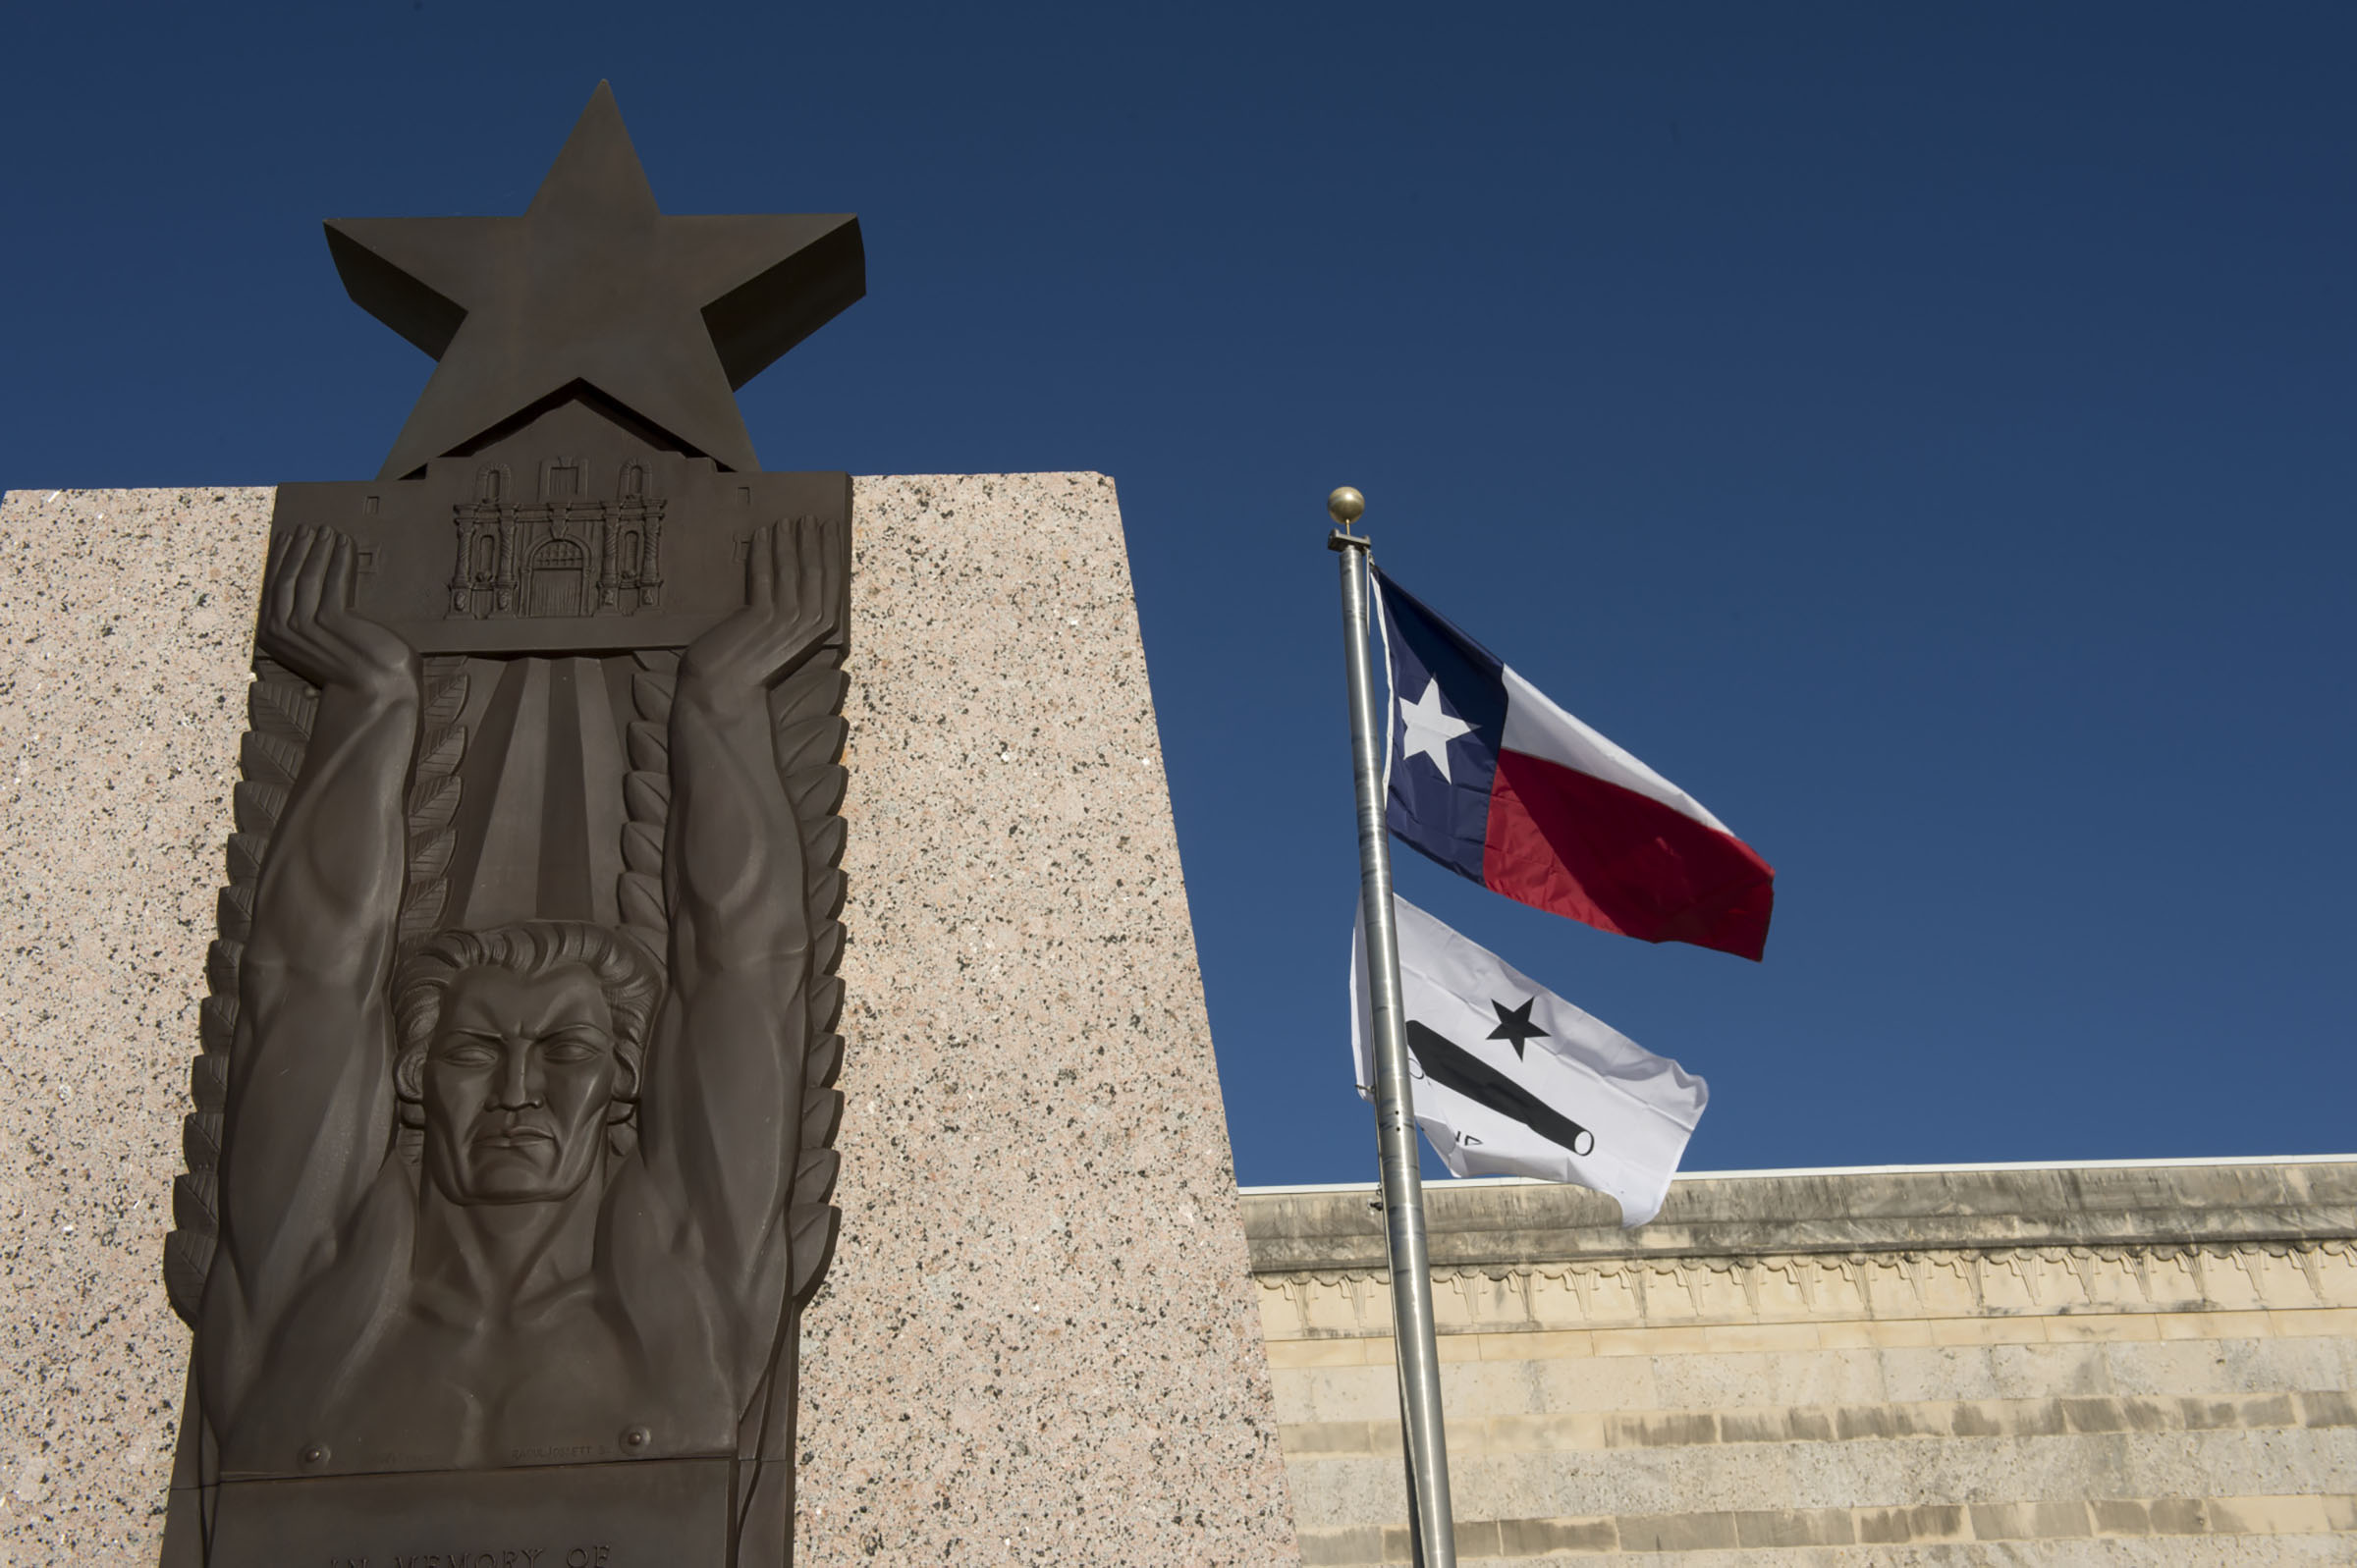 A Texas flag flies above a light-colored stone wall.